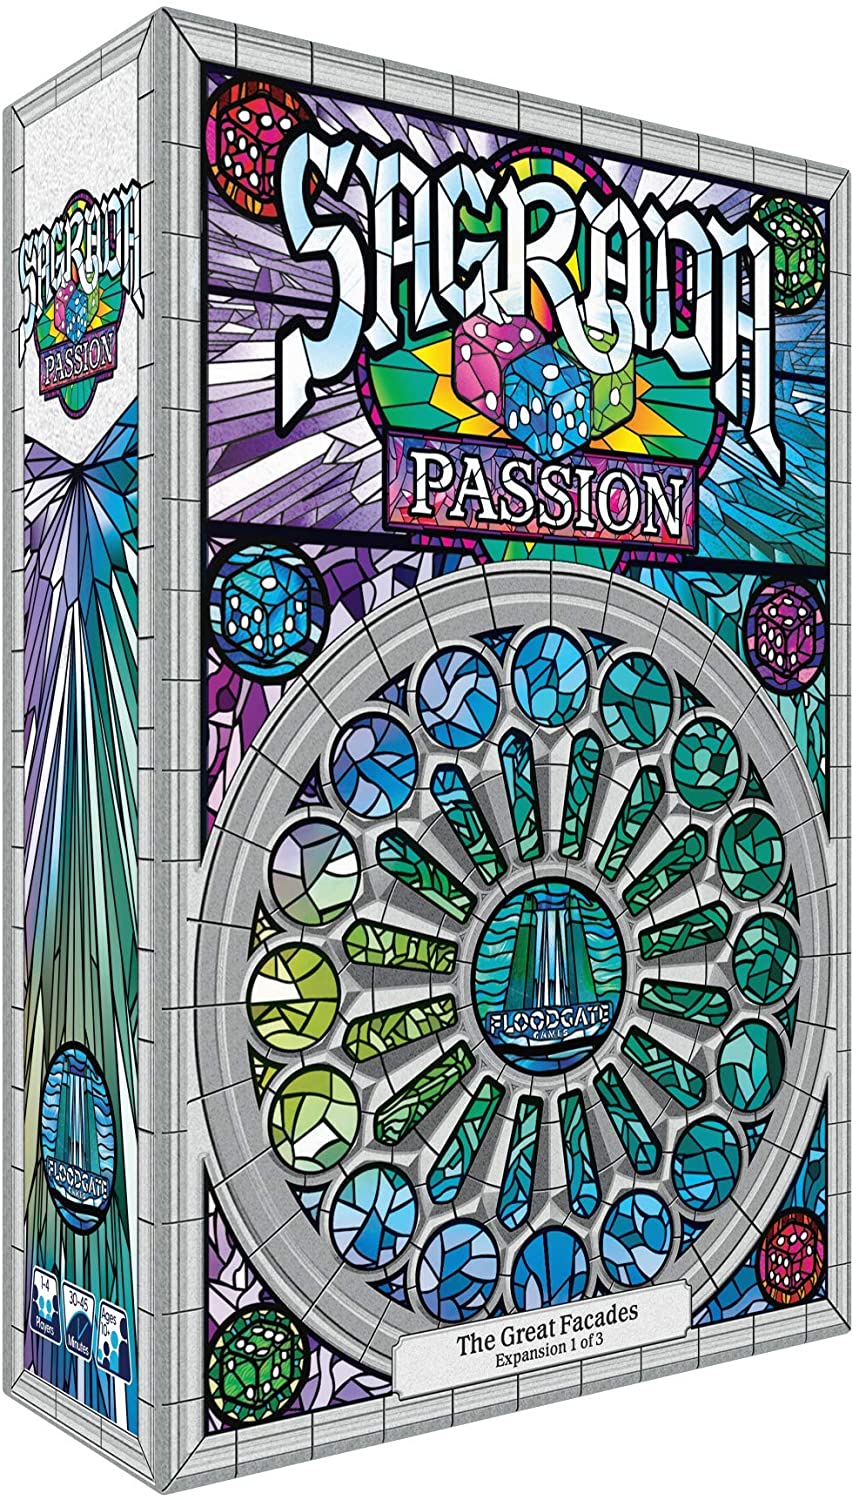 Sagrada: The Great Facades - Passion expansion